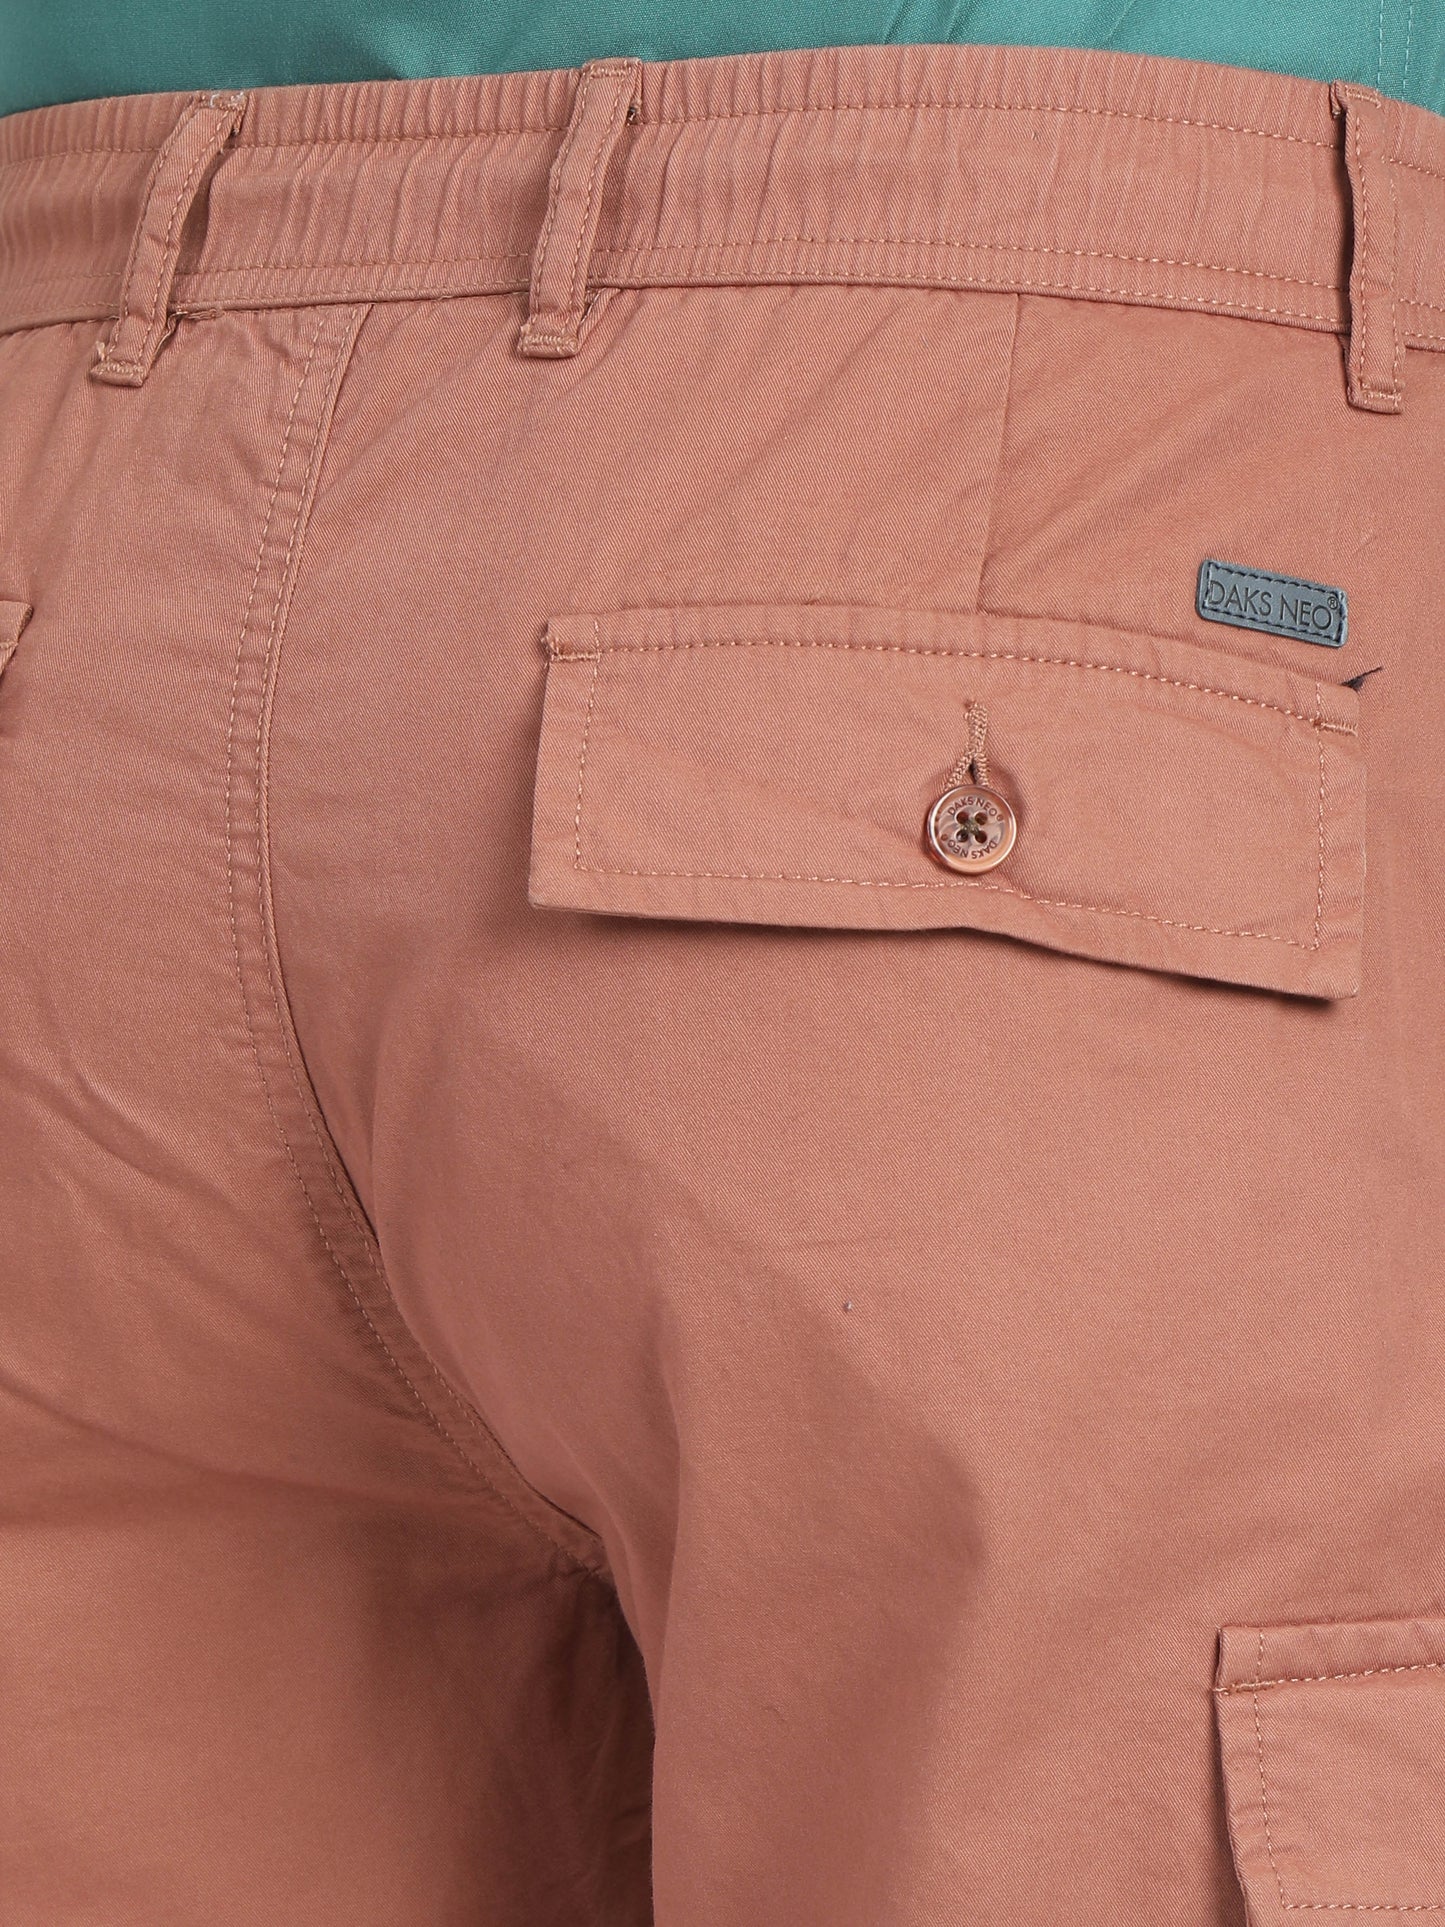 RELAXED PRO CARGO SHORTS-SEA PINK